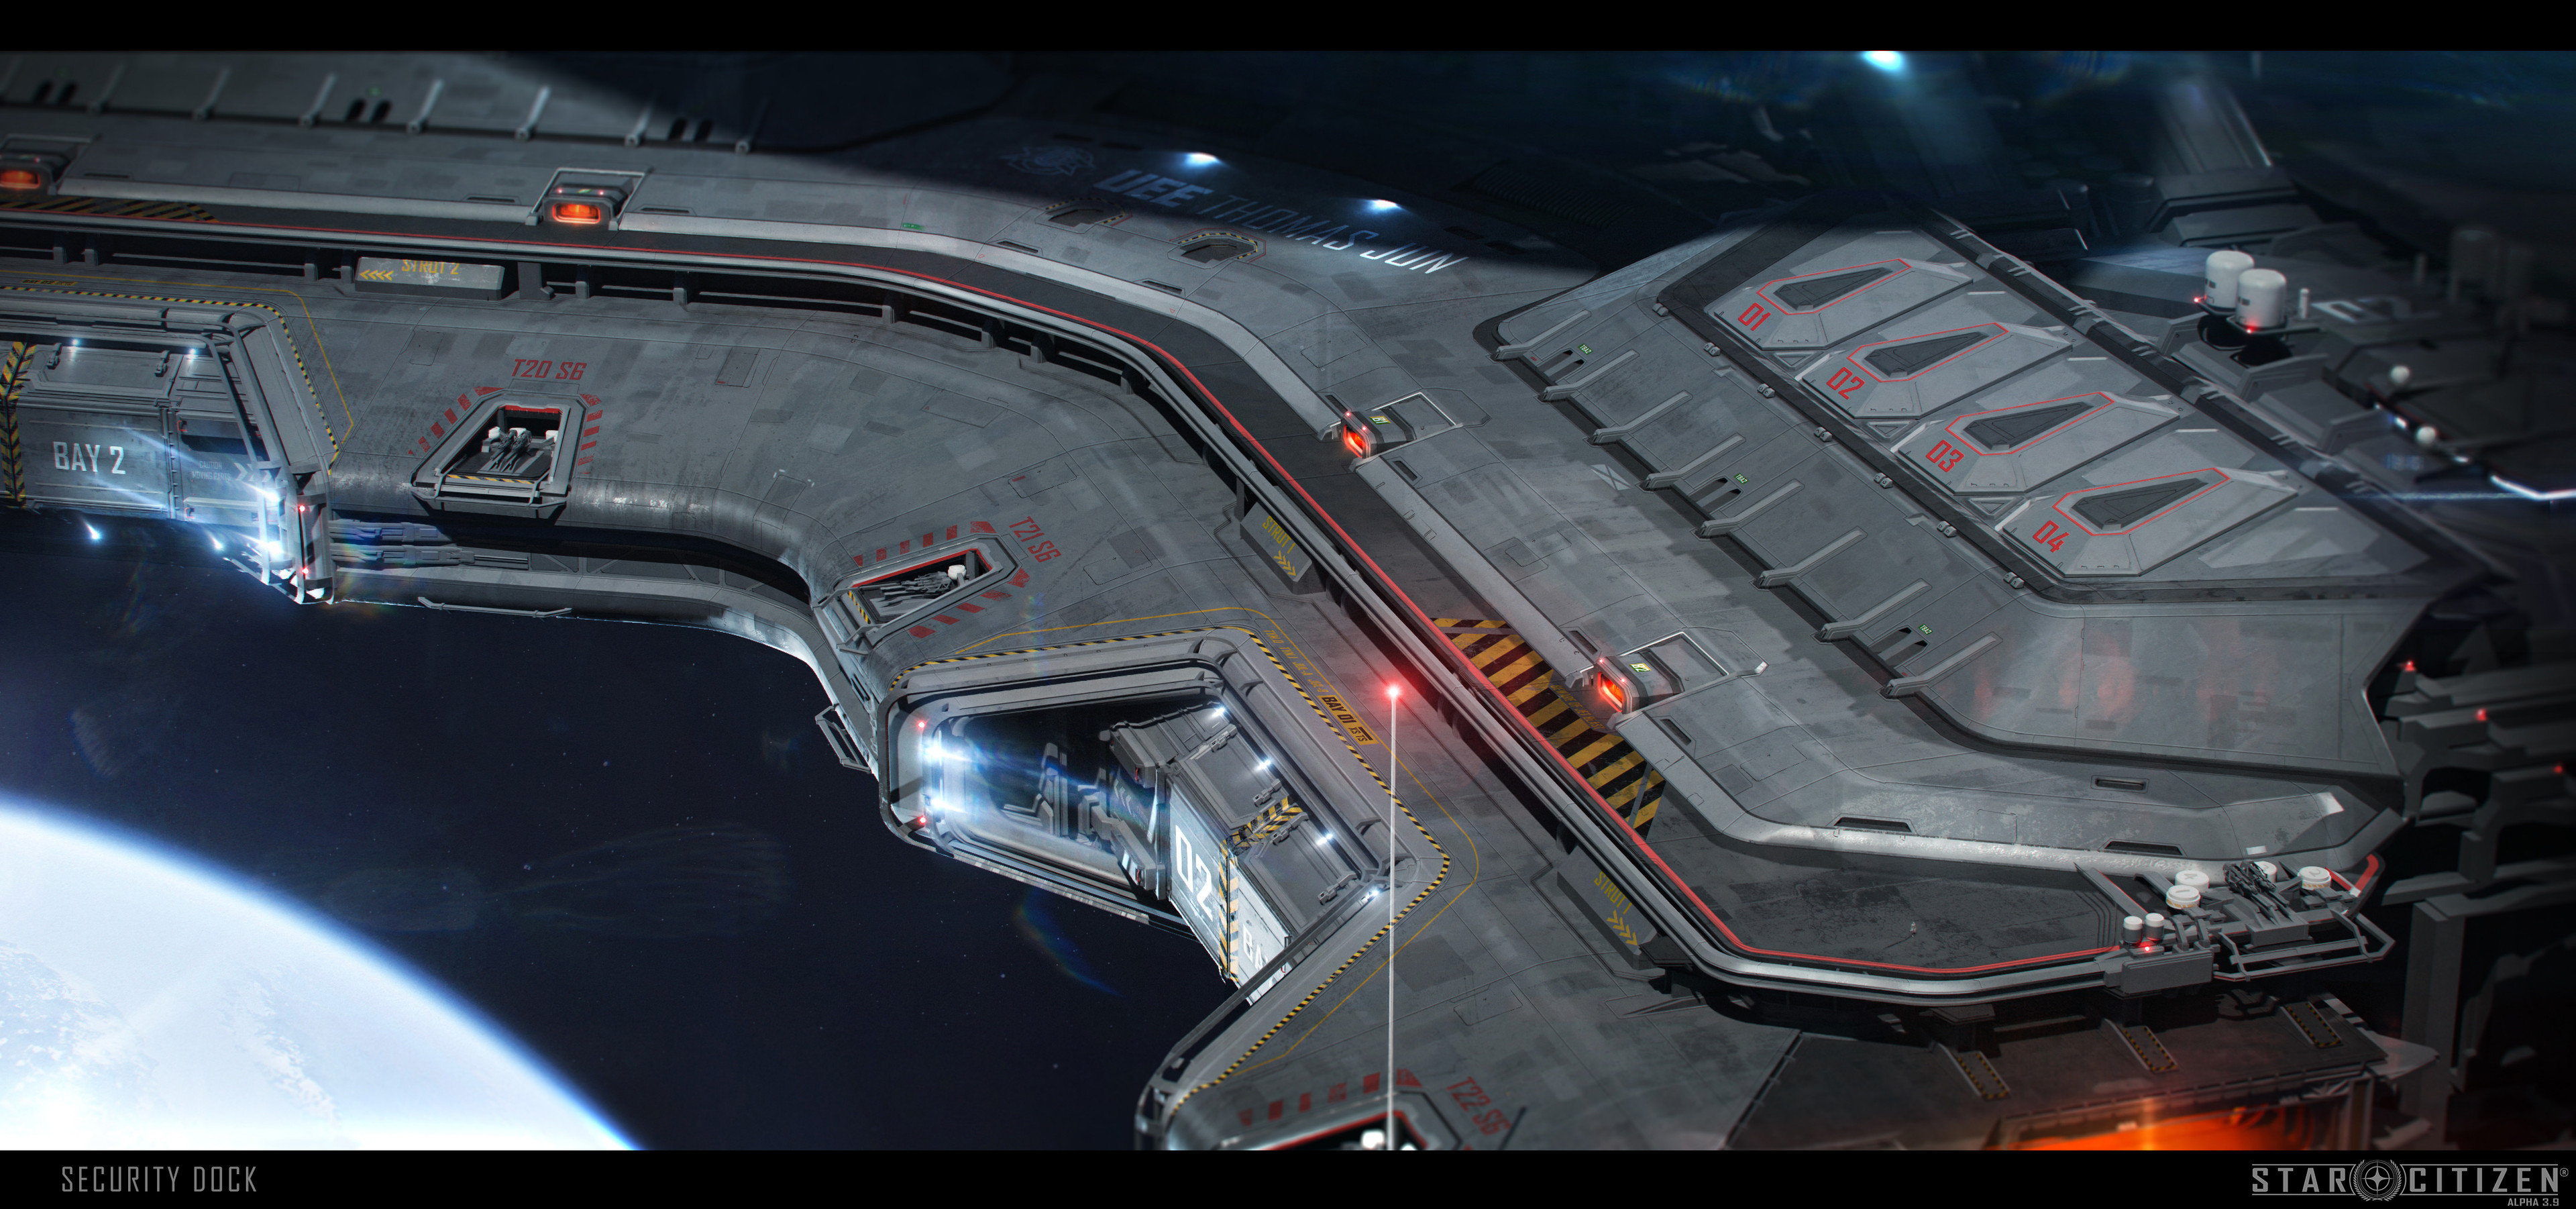 Security Dock Concept - Armor and bays